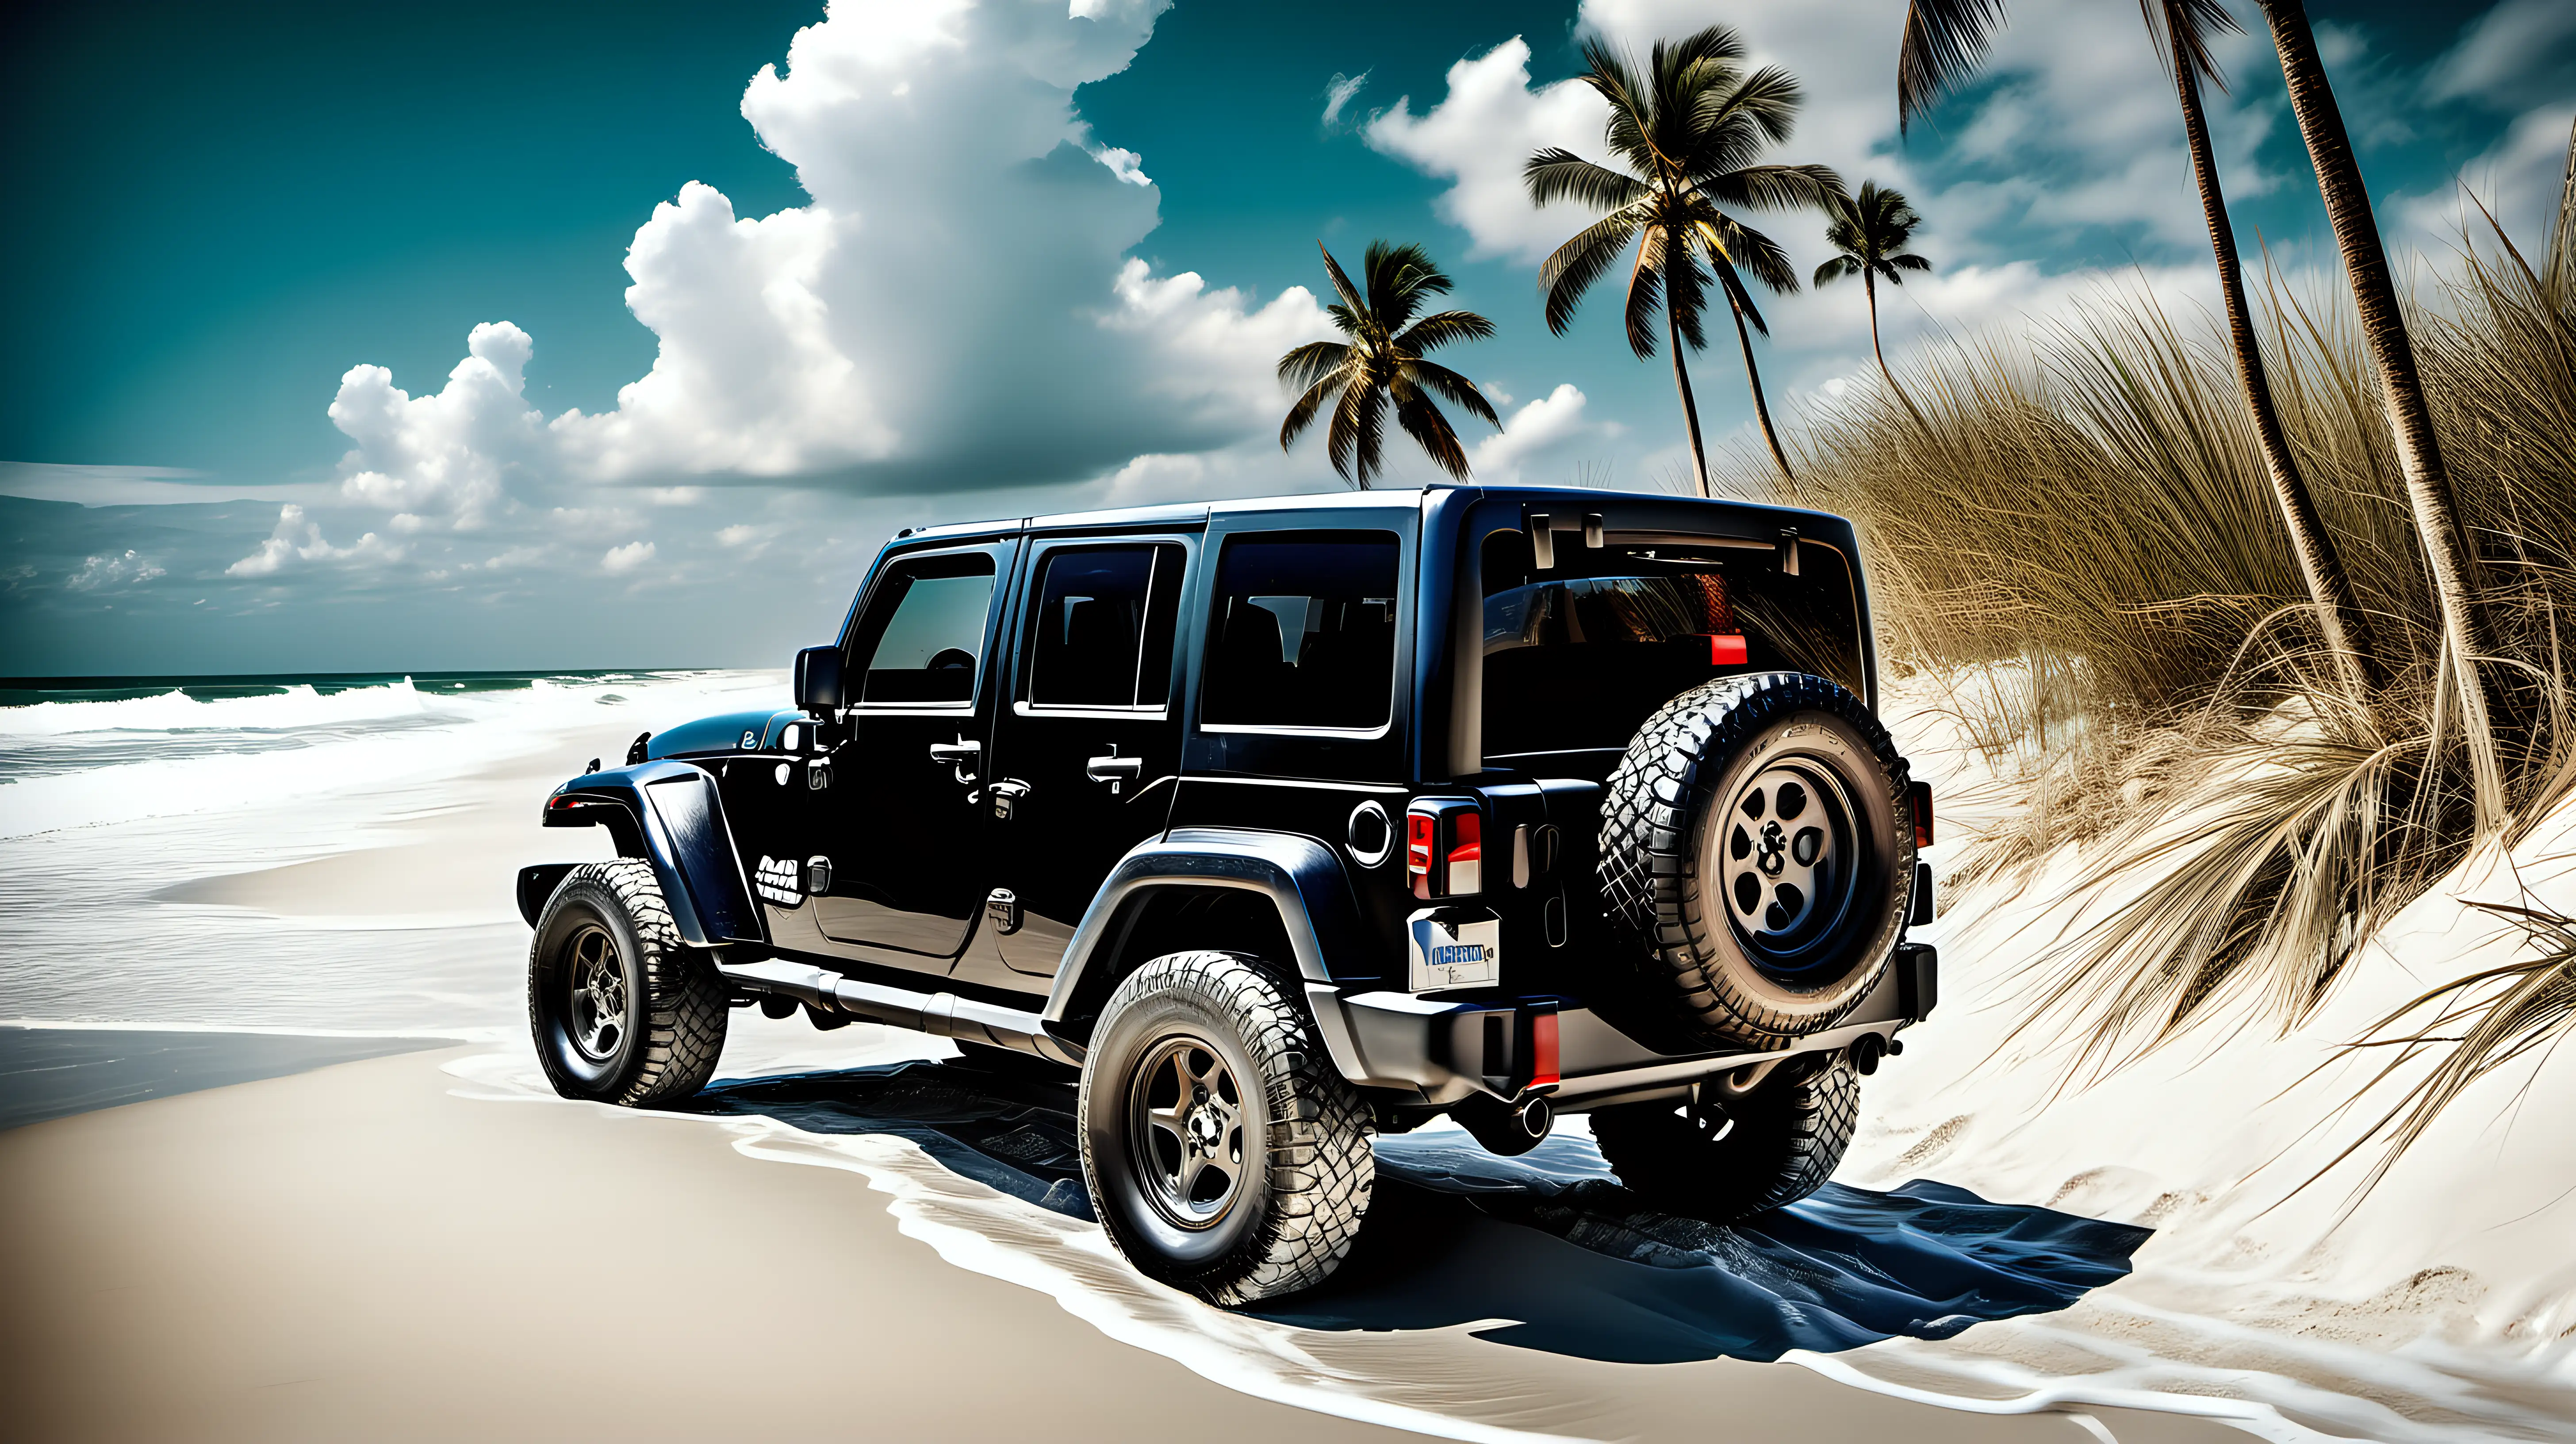 /imagine prompt: A photographic style image of a rugged Jeep Wrangler on a sunny Florida beach, surrounded by palm trees, with the surf in the background and the vehicle leaving a trail in the soft, white sand. Created Using: beach adventure, rugged vehicle, sunny ambiance, palm tree landscape, surf background, trail in sand, Florida beach day, hd quality, vivid style --ar 16:9 --v 6.0

